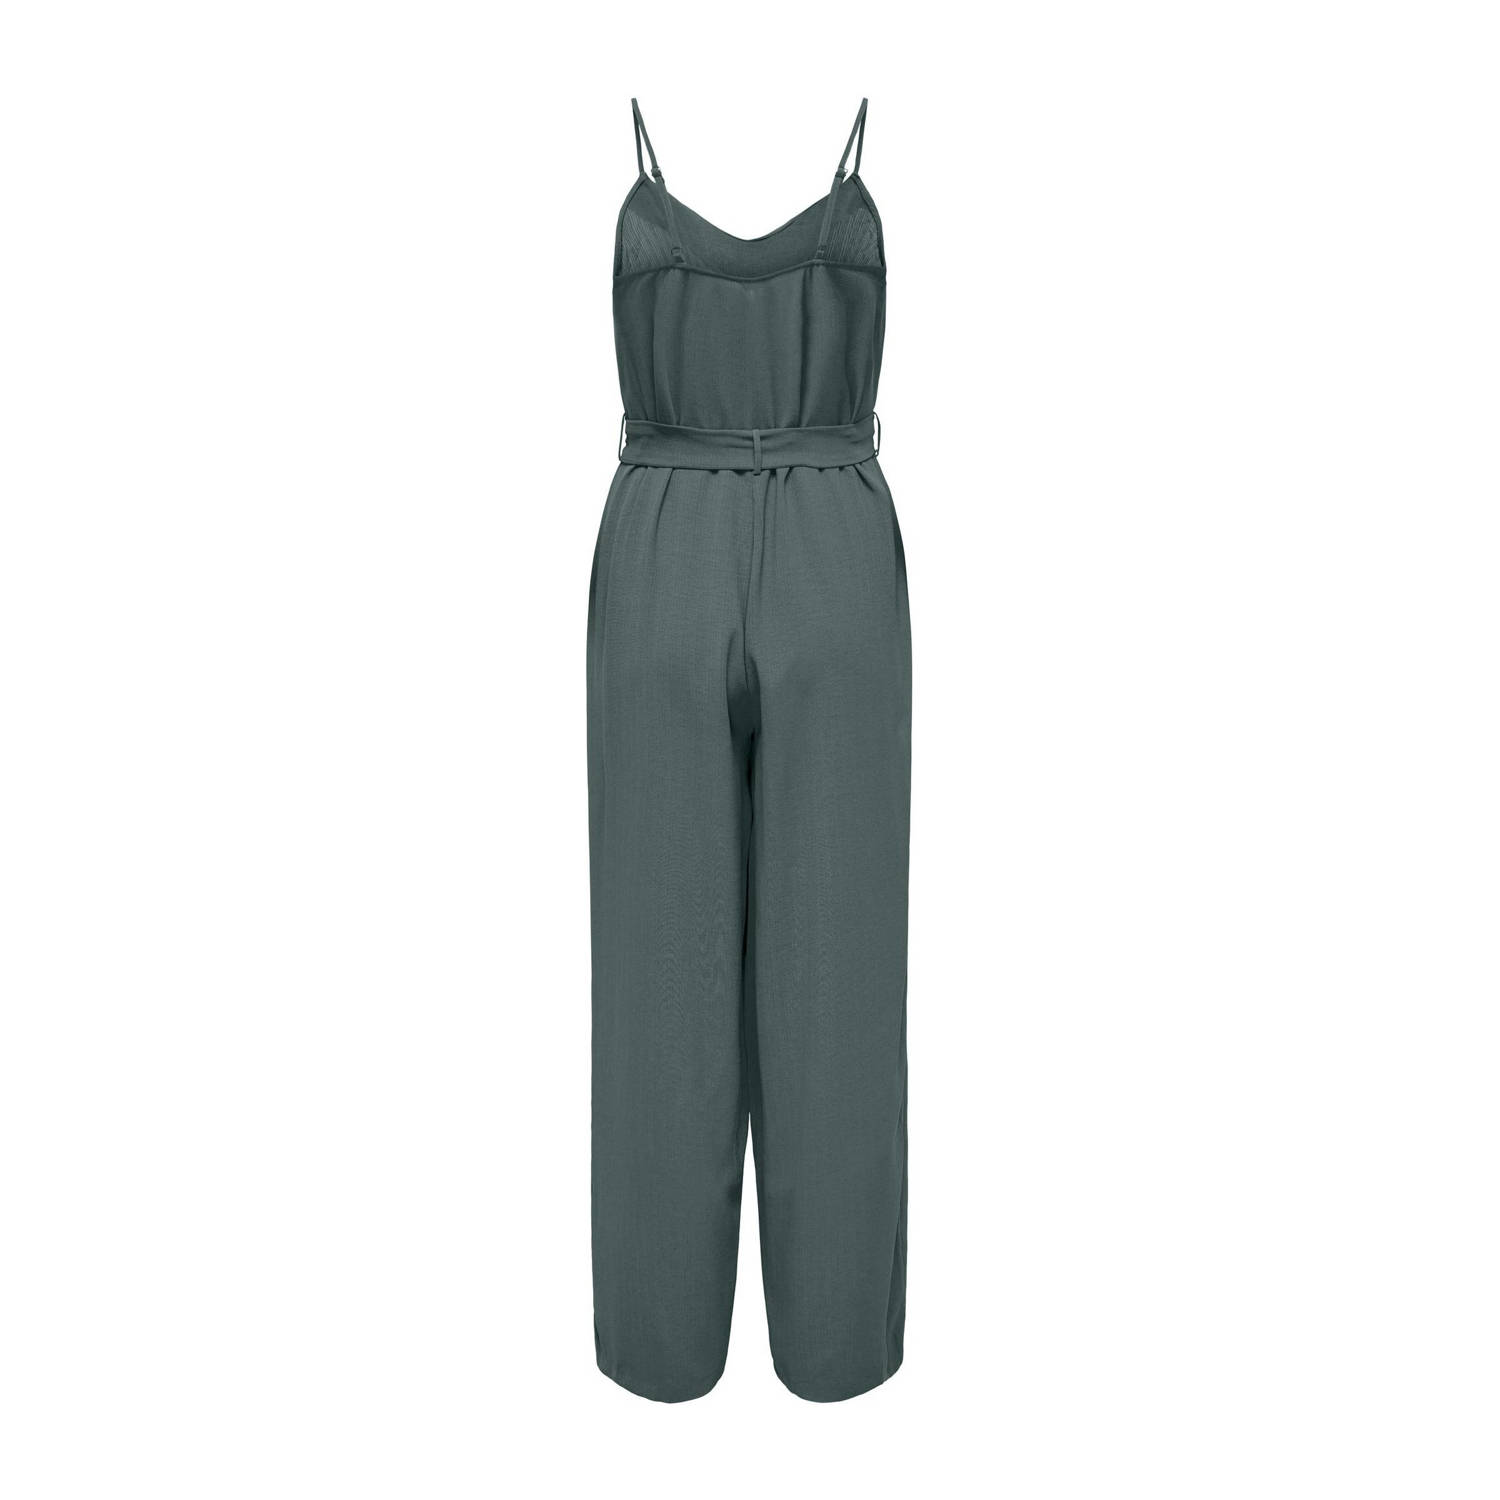 ONLY jumpsuit ONLCALI groen